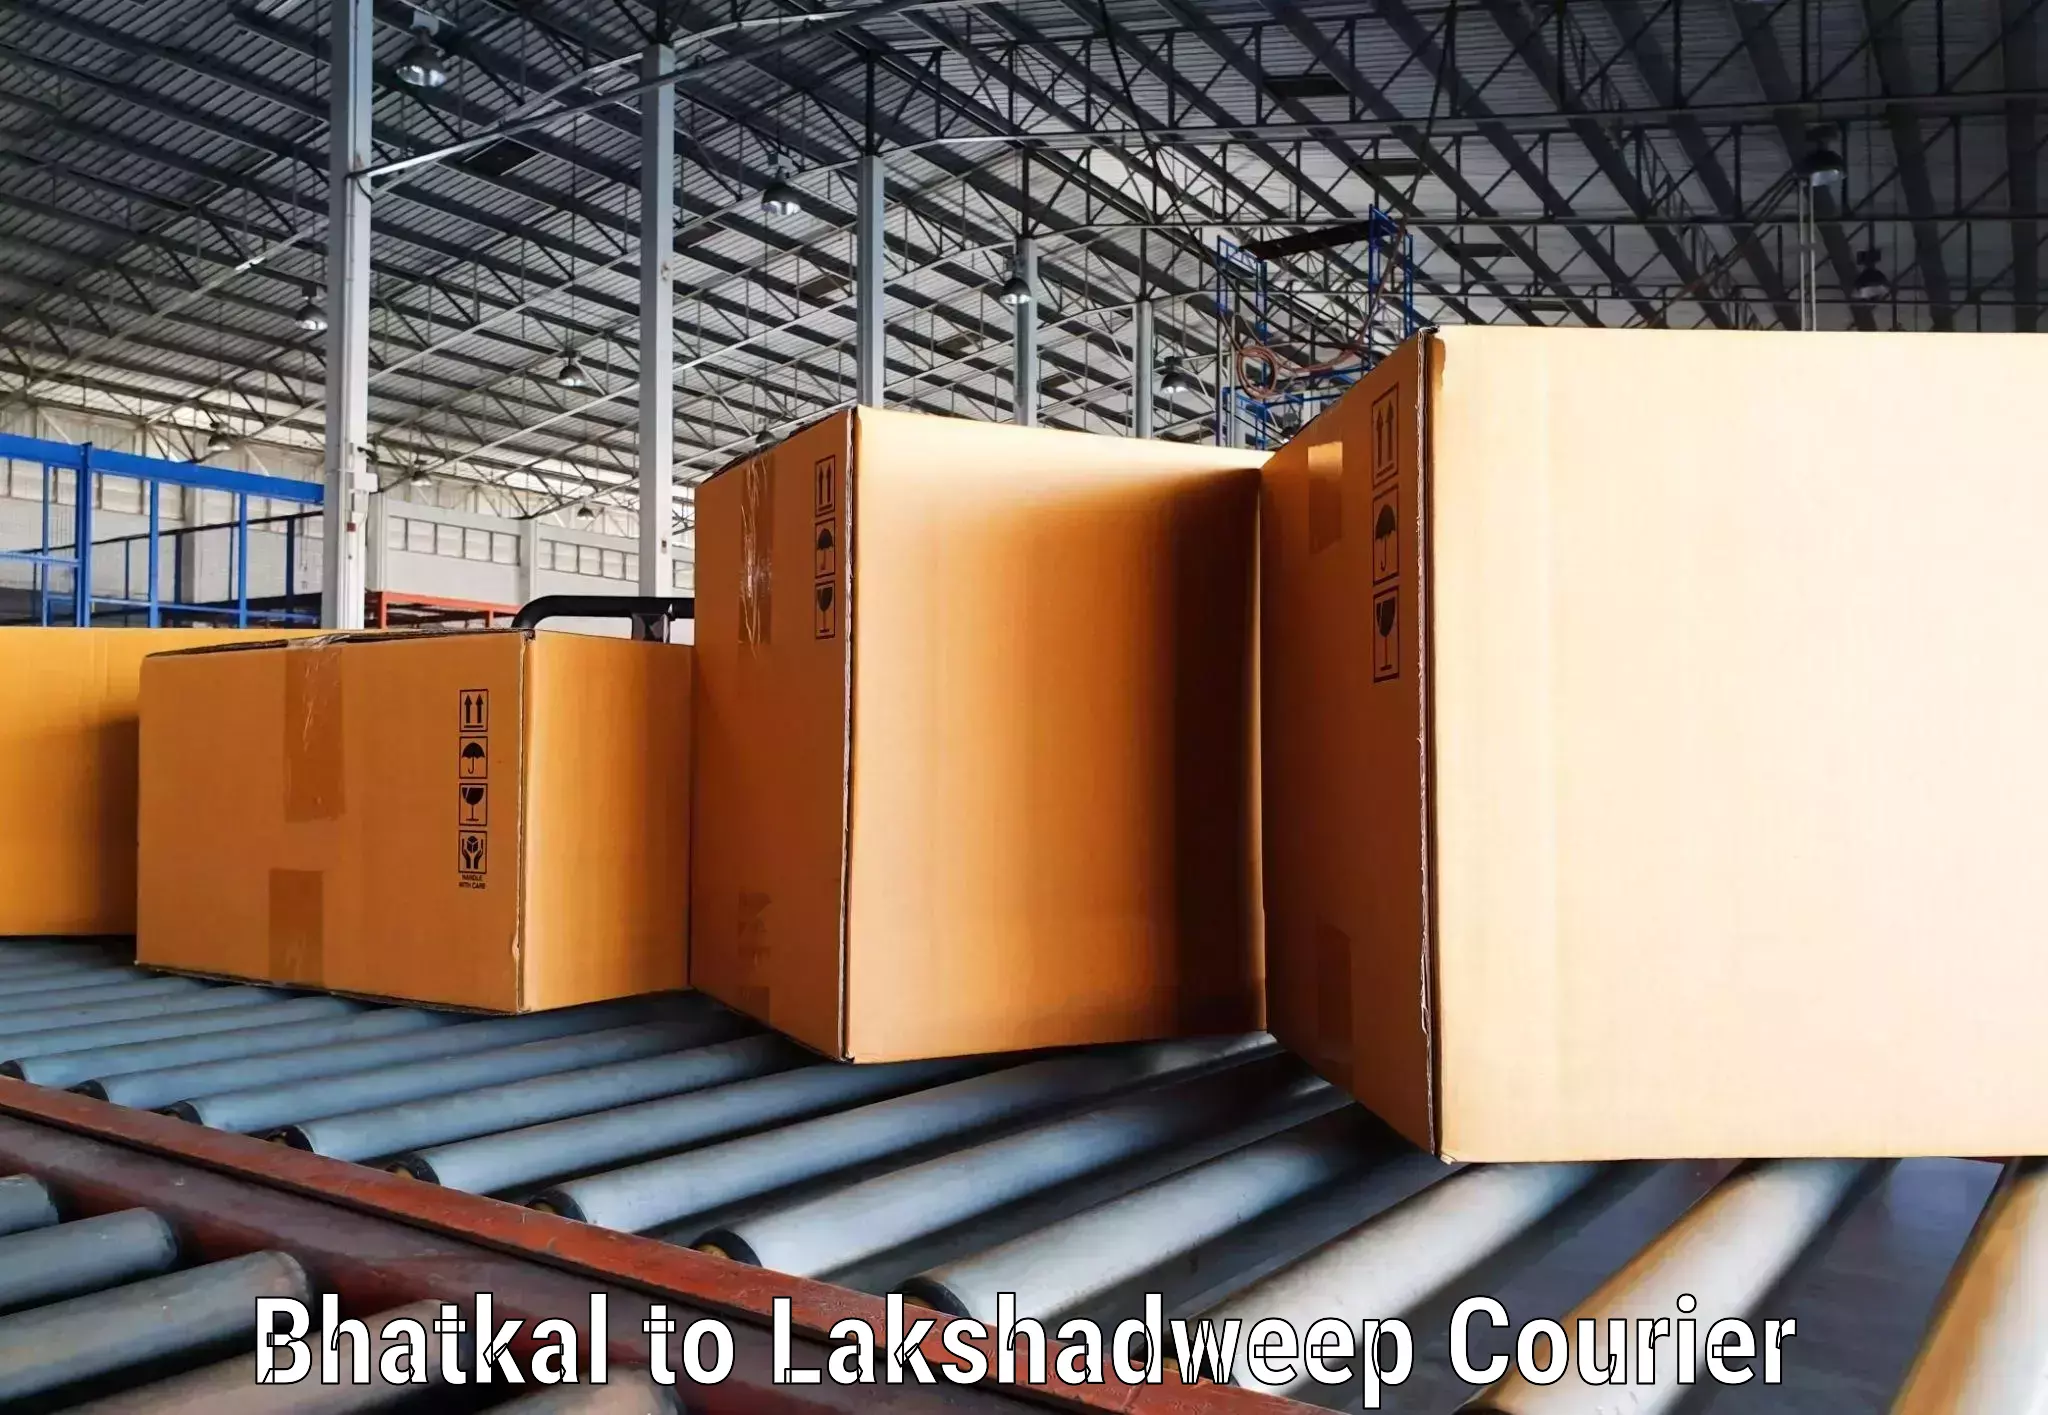 Quality courier services Bhatkal to Lakshadweep